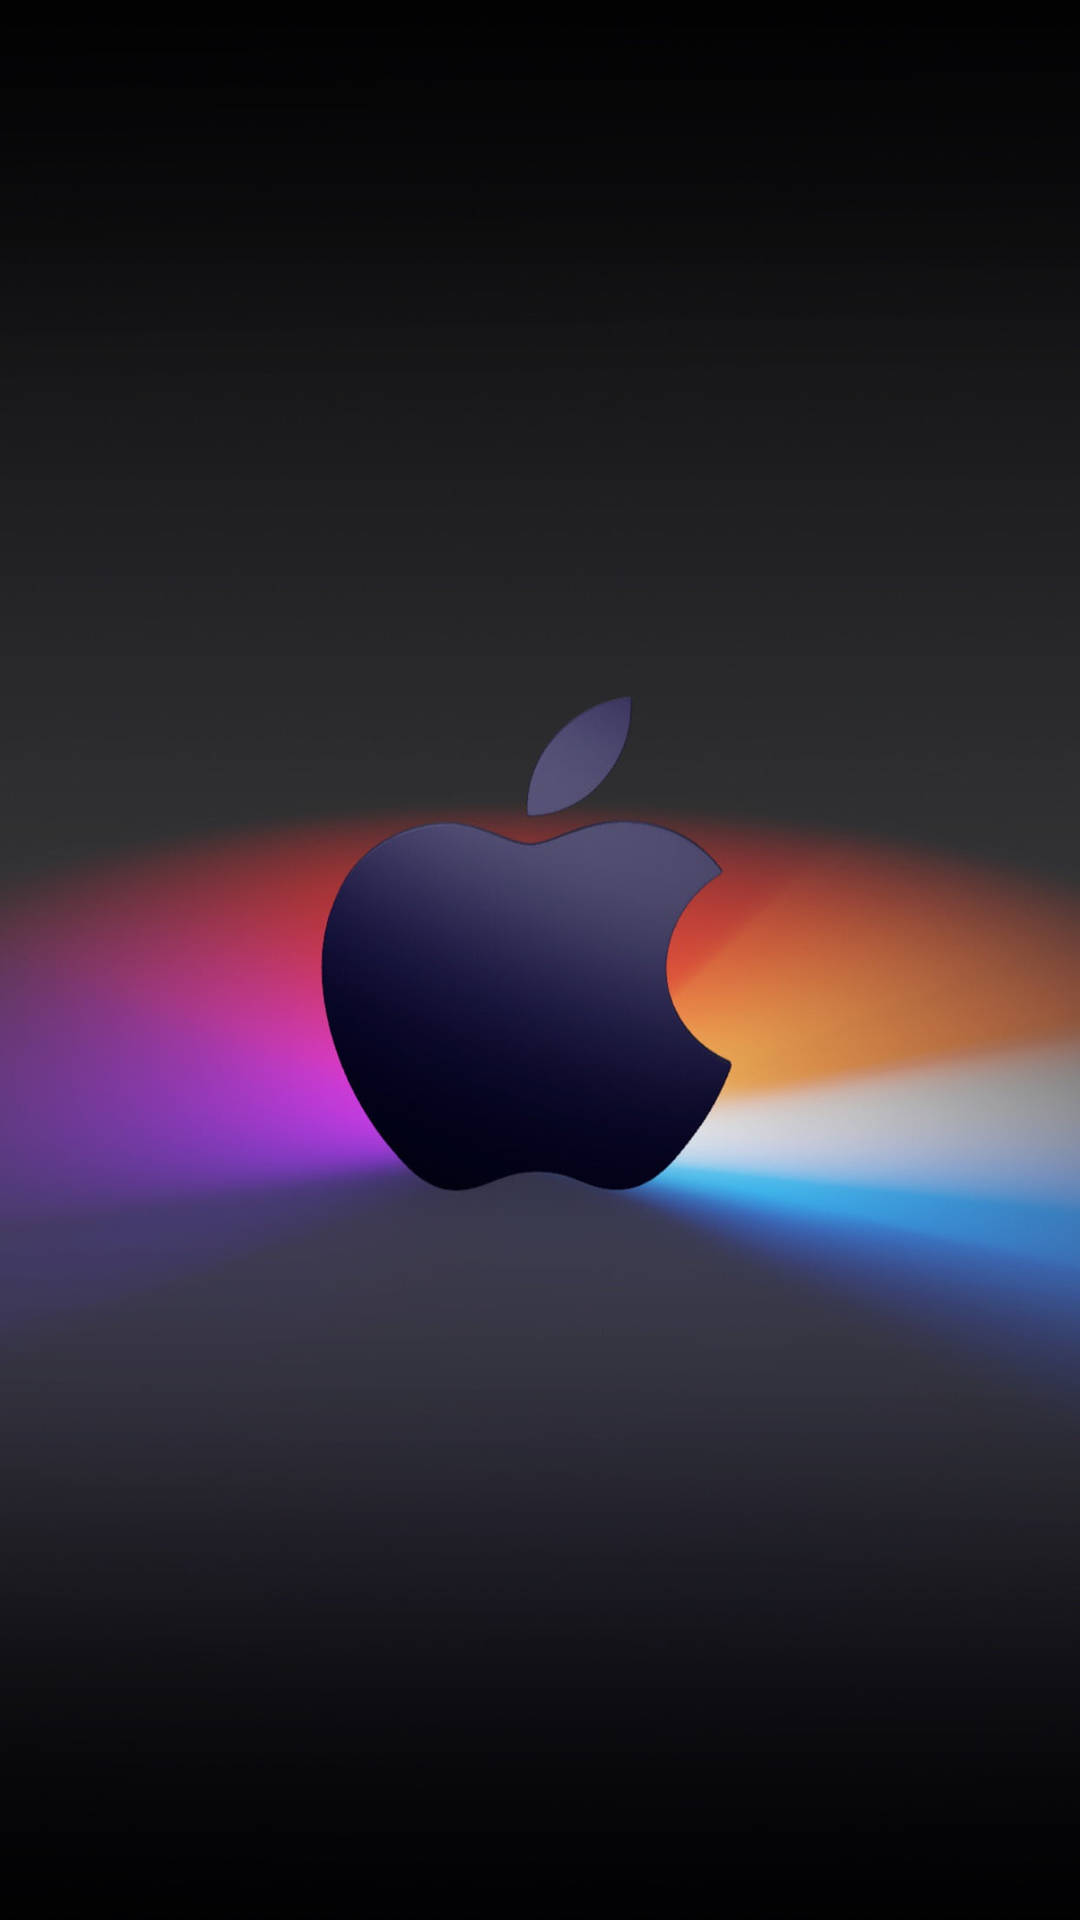 Full Hd Apple With Bright-colored Rays Background